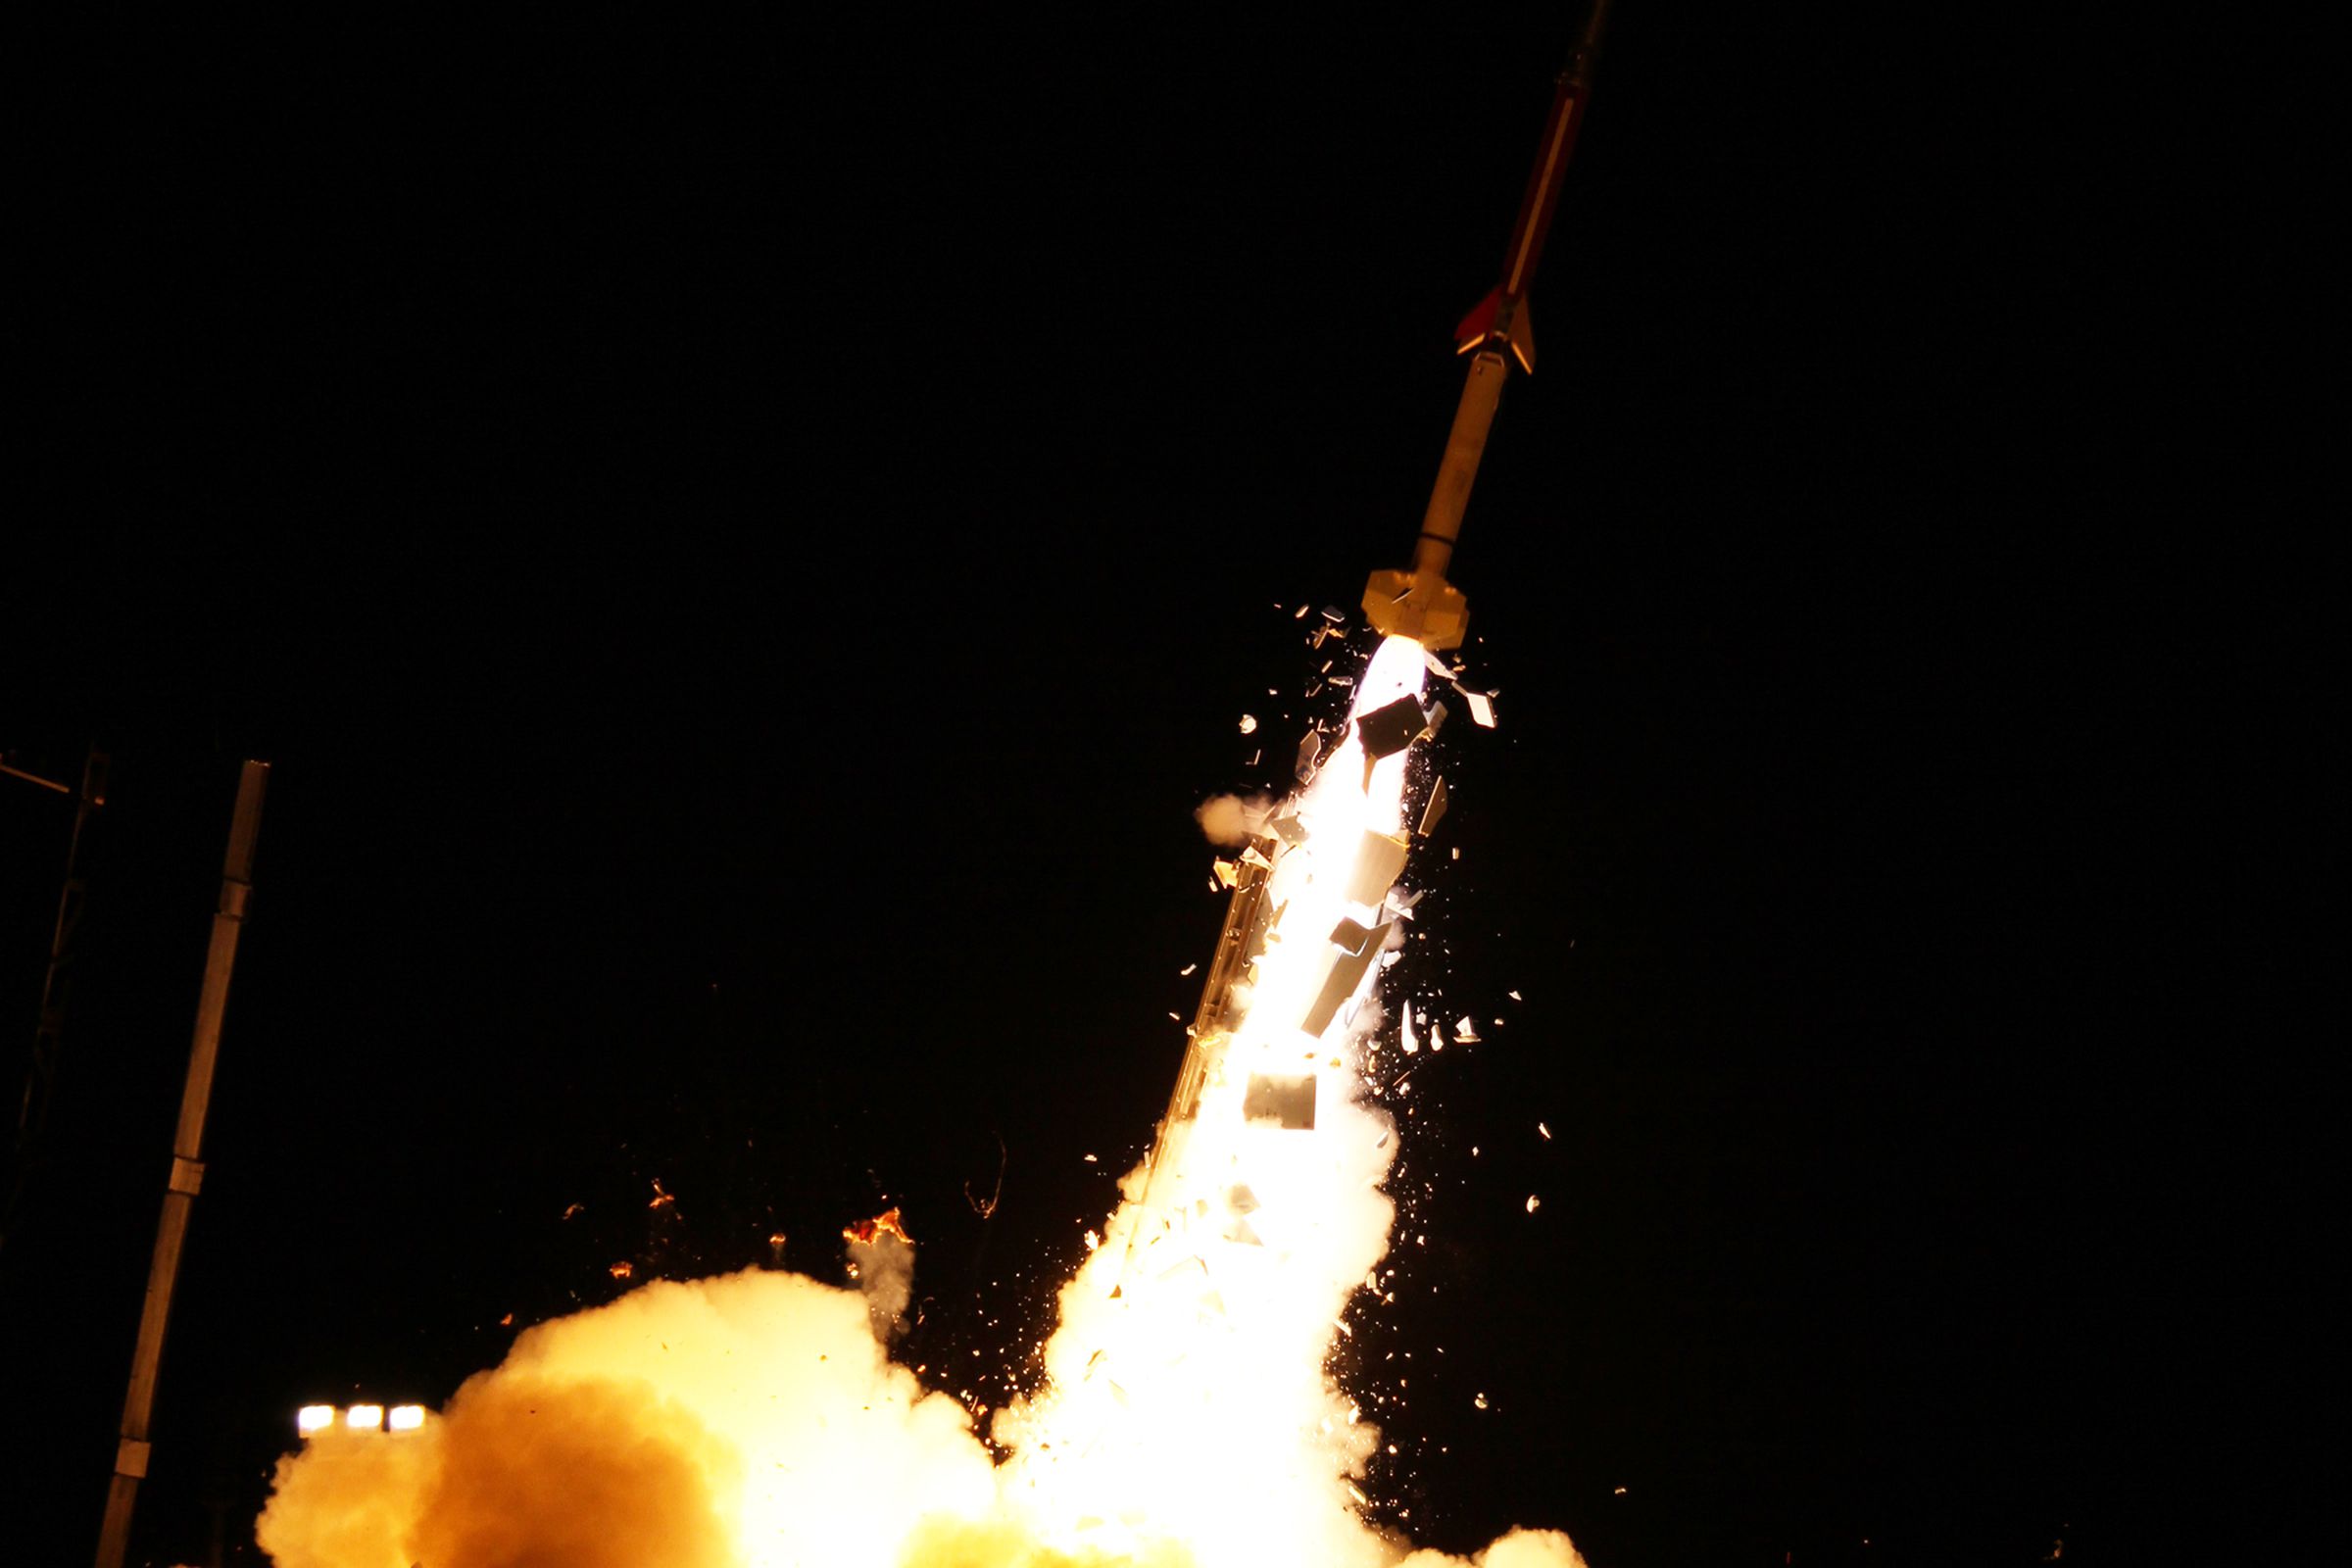 One of NASA’s sounding rockets, from a launch in 2012.